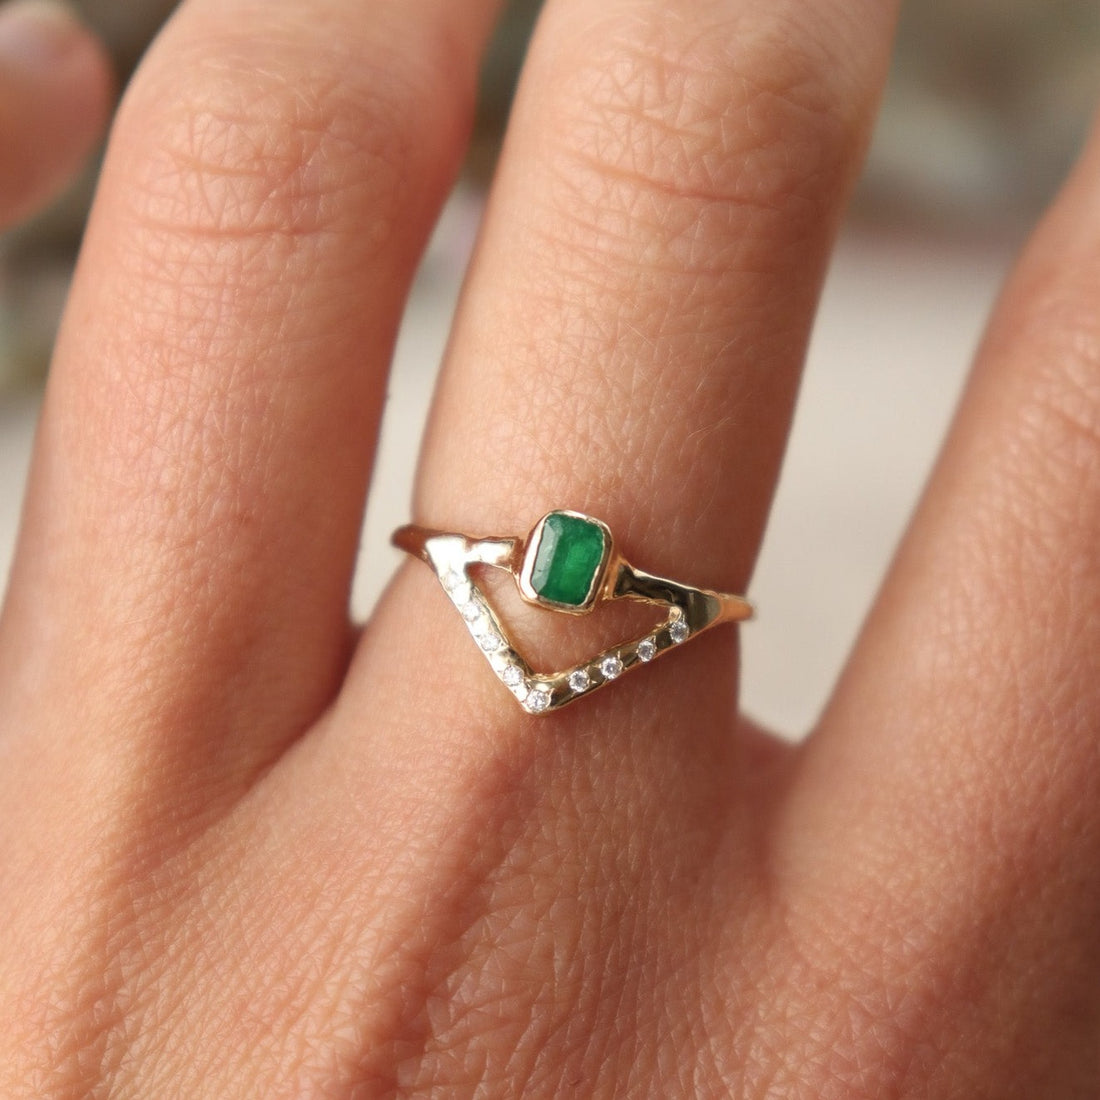 Stunning emerald ring with a bezel-set, rich green gemstone elegantly perched on a delicate, narrow band. Beneath it, a gracefully designed V-band features organically set diamonds, adding a touch of nature-inspired luxury to your jewelry collection. Worn on a hand to show scale.